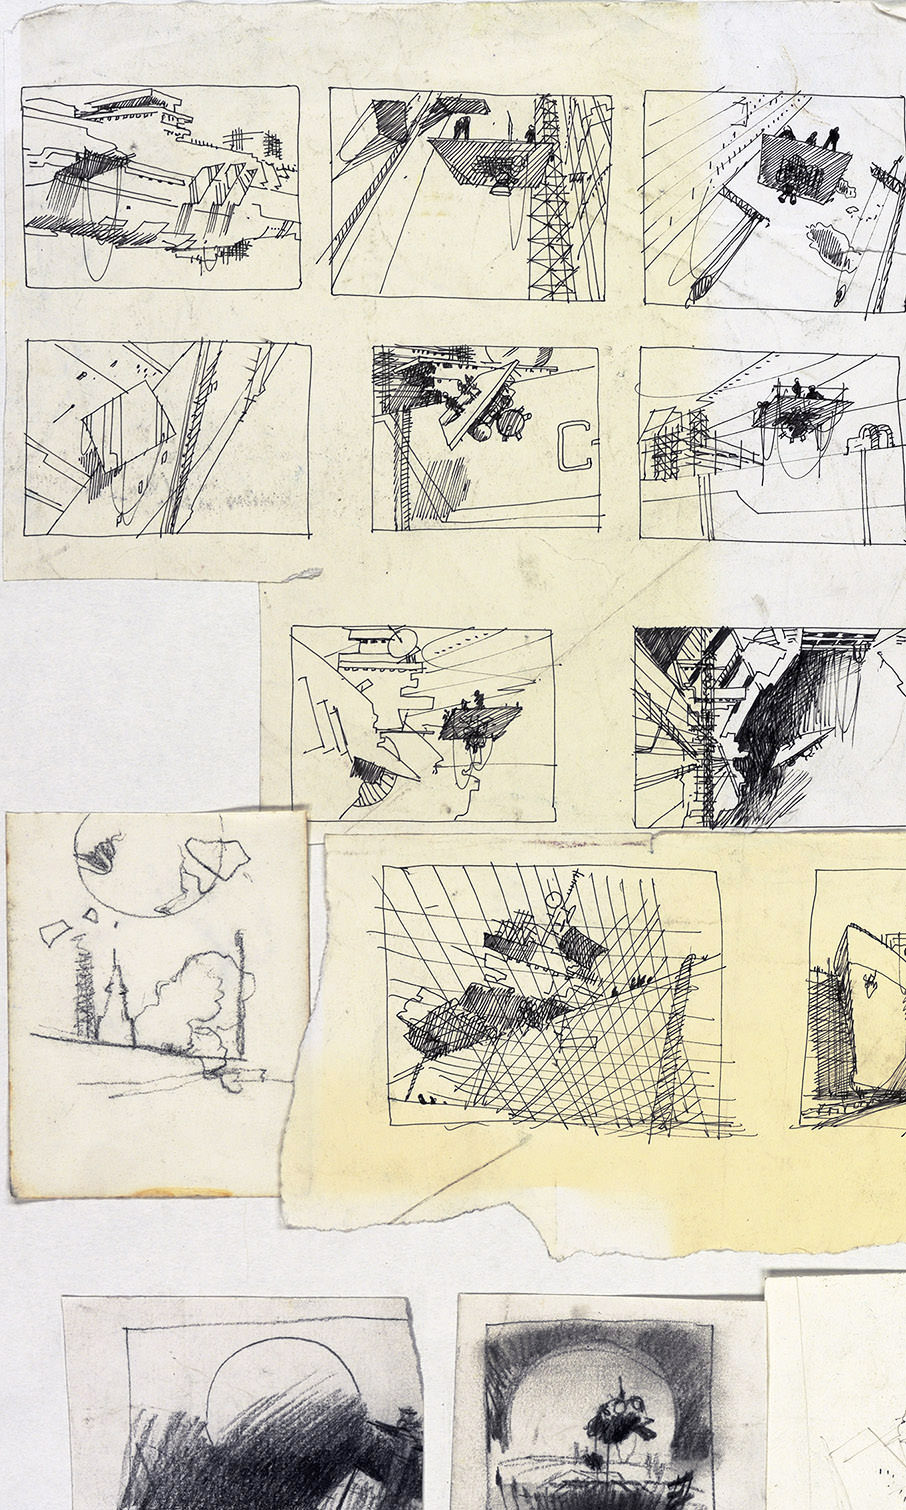 John Harris | A random set of sketches from the endpaper